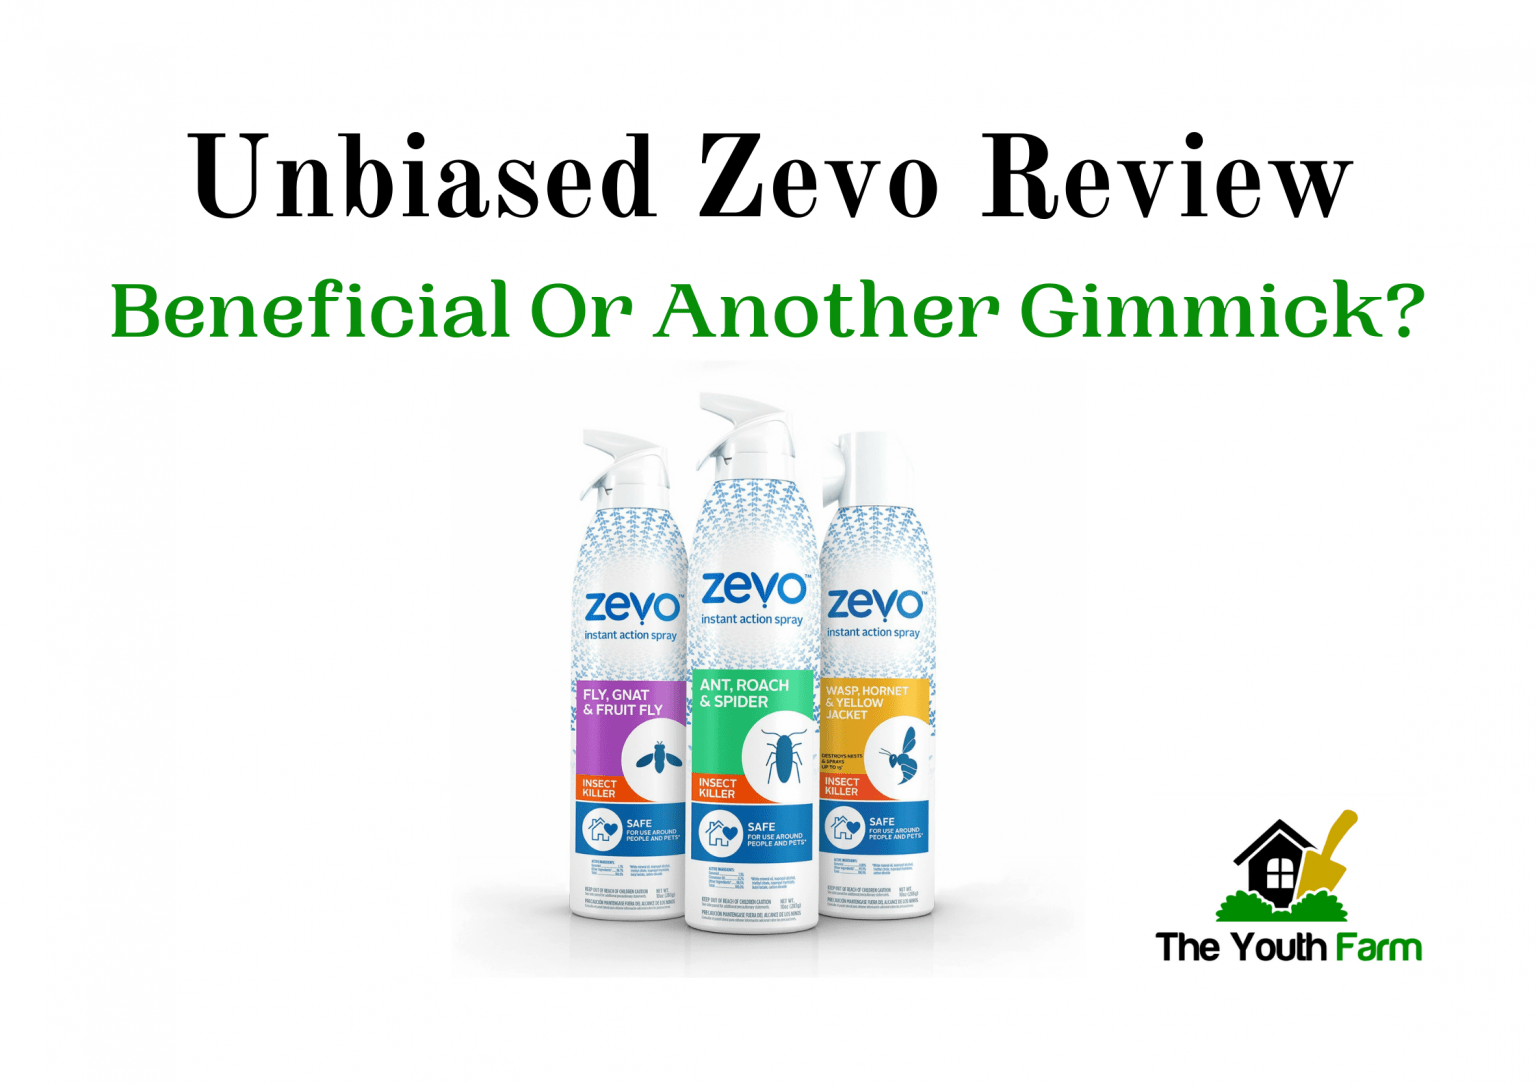 Zevo Reviews Just Another Gimmick? TheYouthFarm